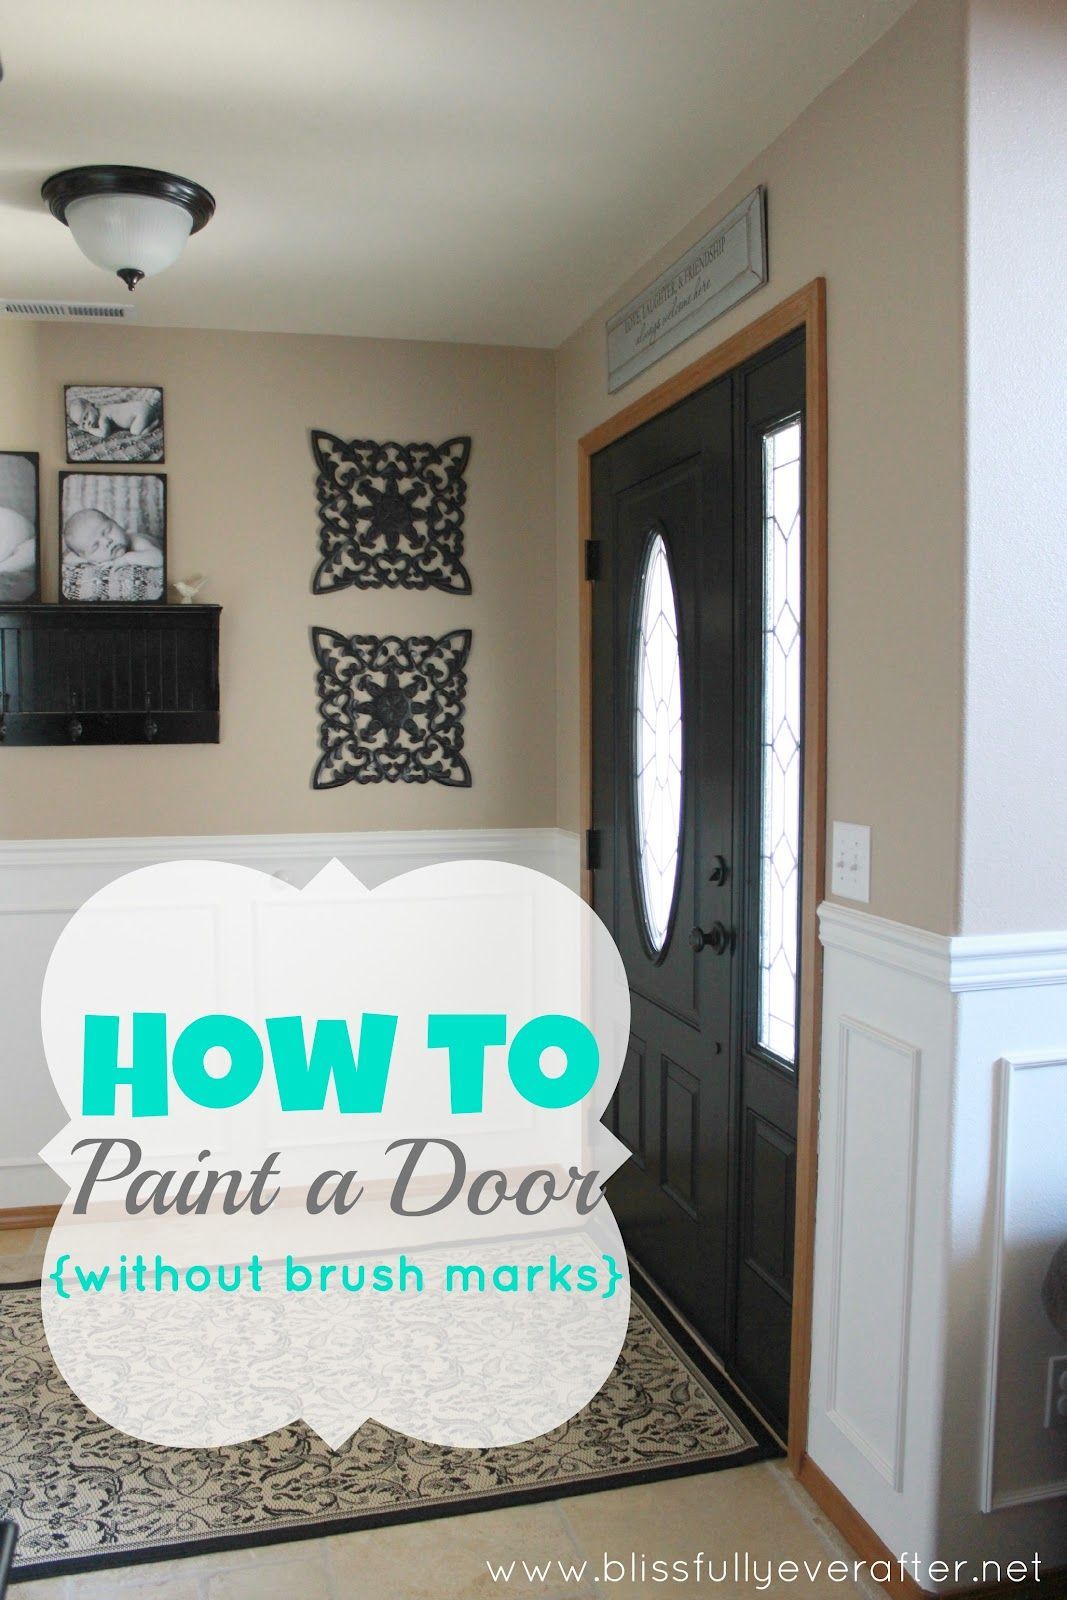 Blissfully Ever After: How to Paint a Door {without brush marks}